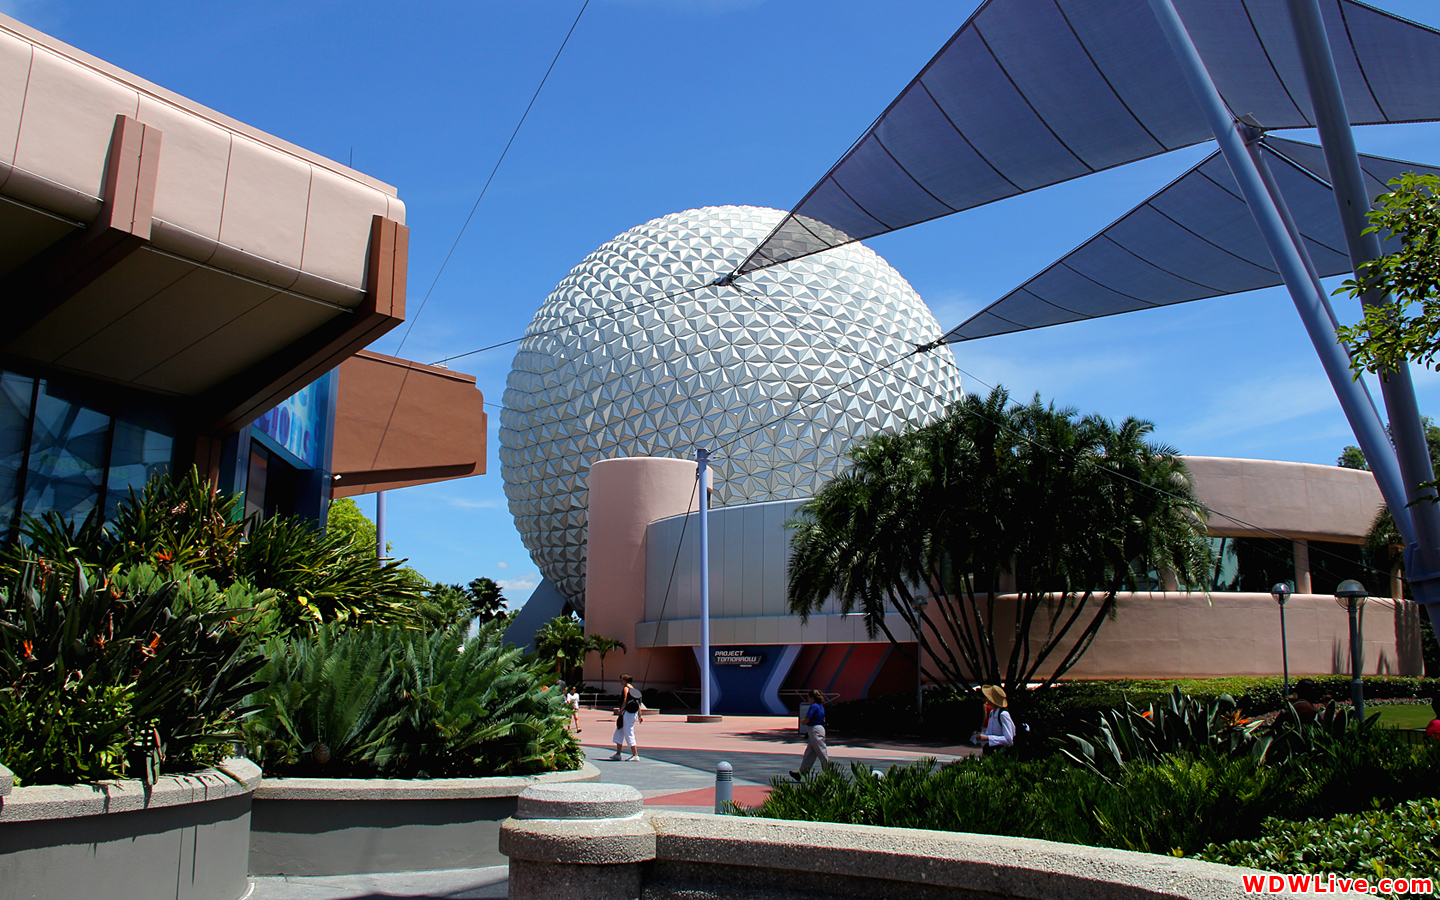 Spaceship Earth Of Epcot S Signature Attraction From